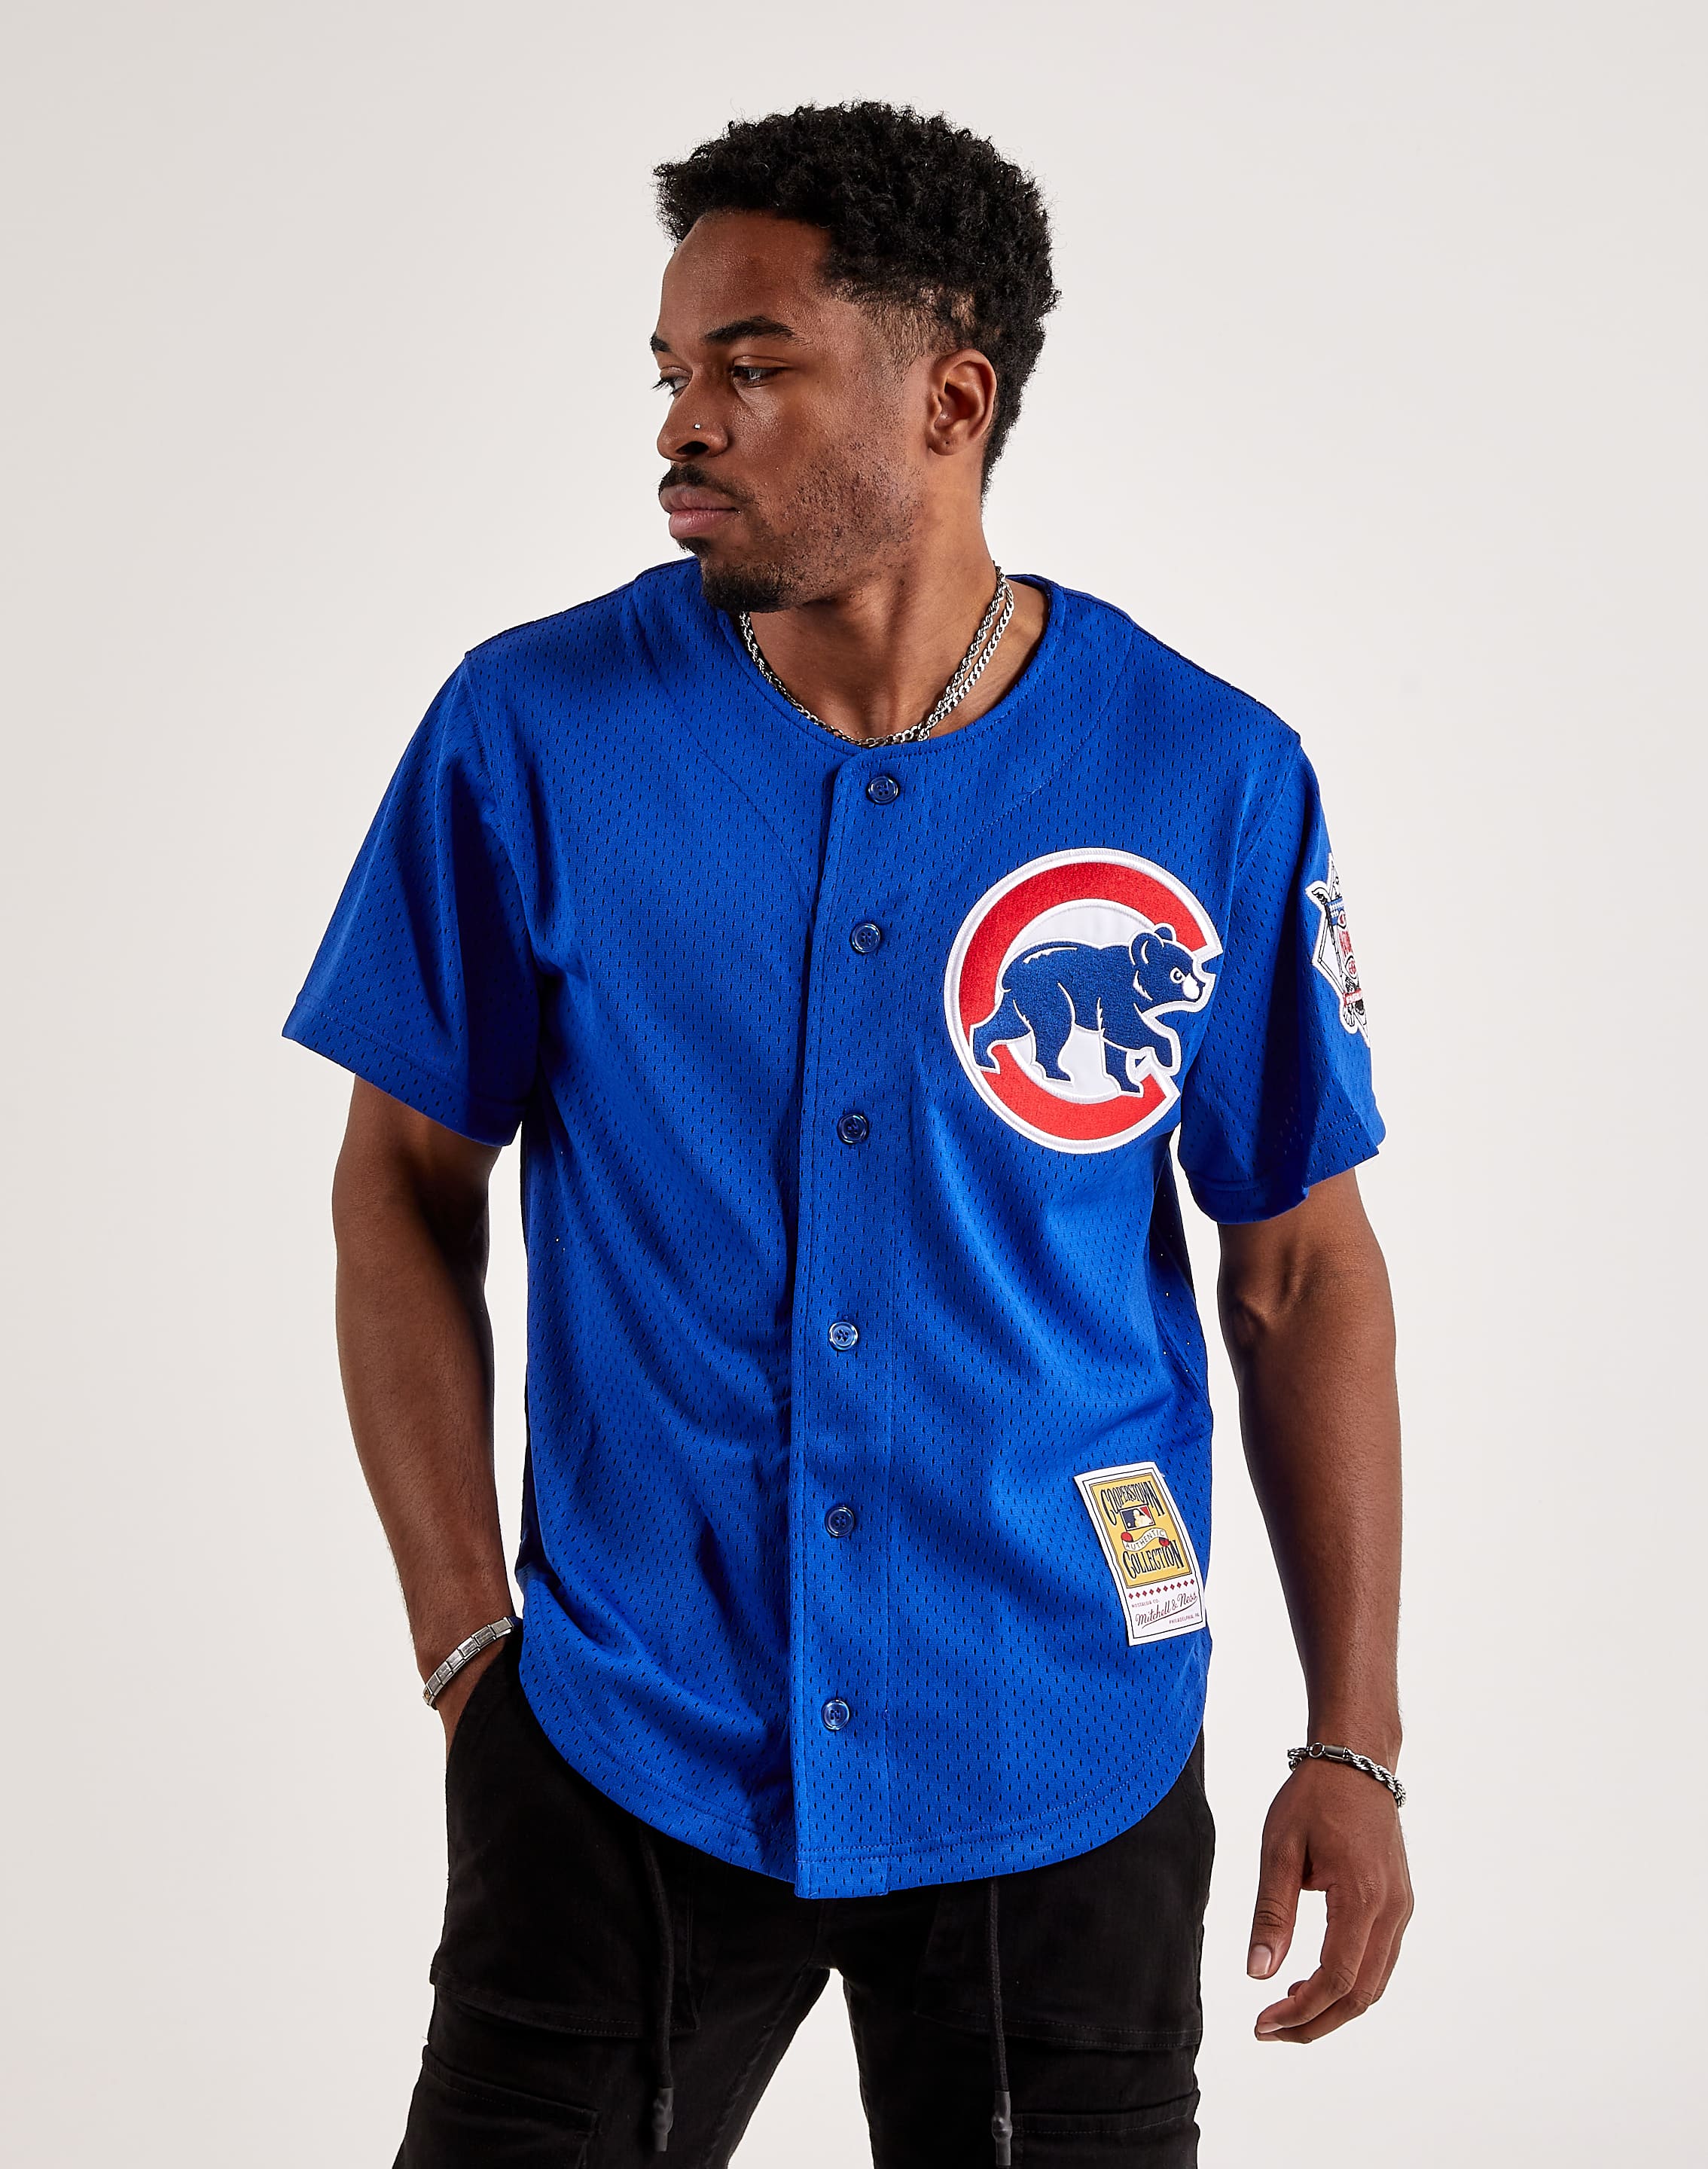 chicago cubs old jersey